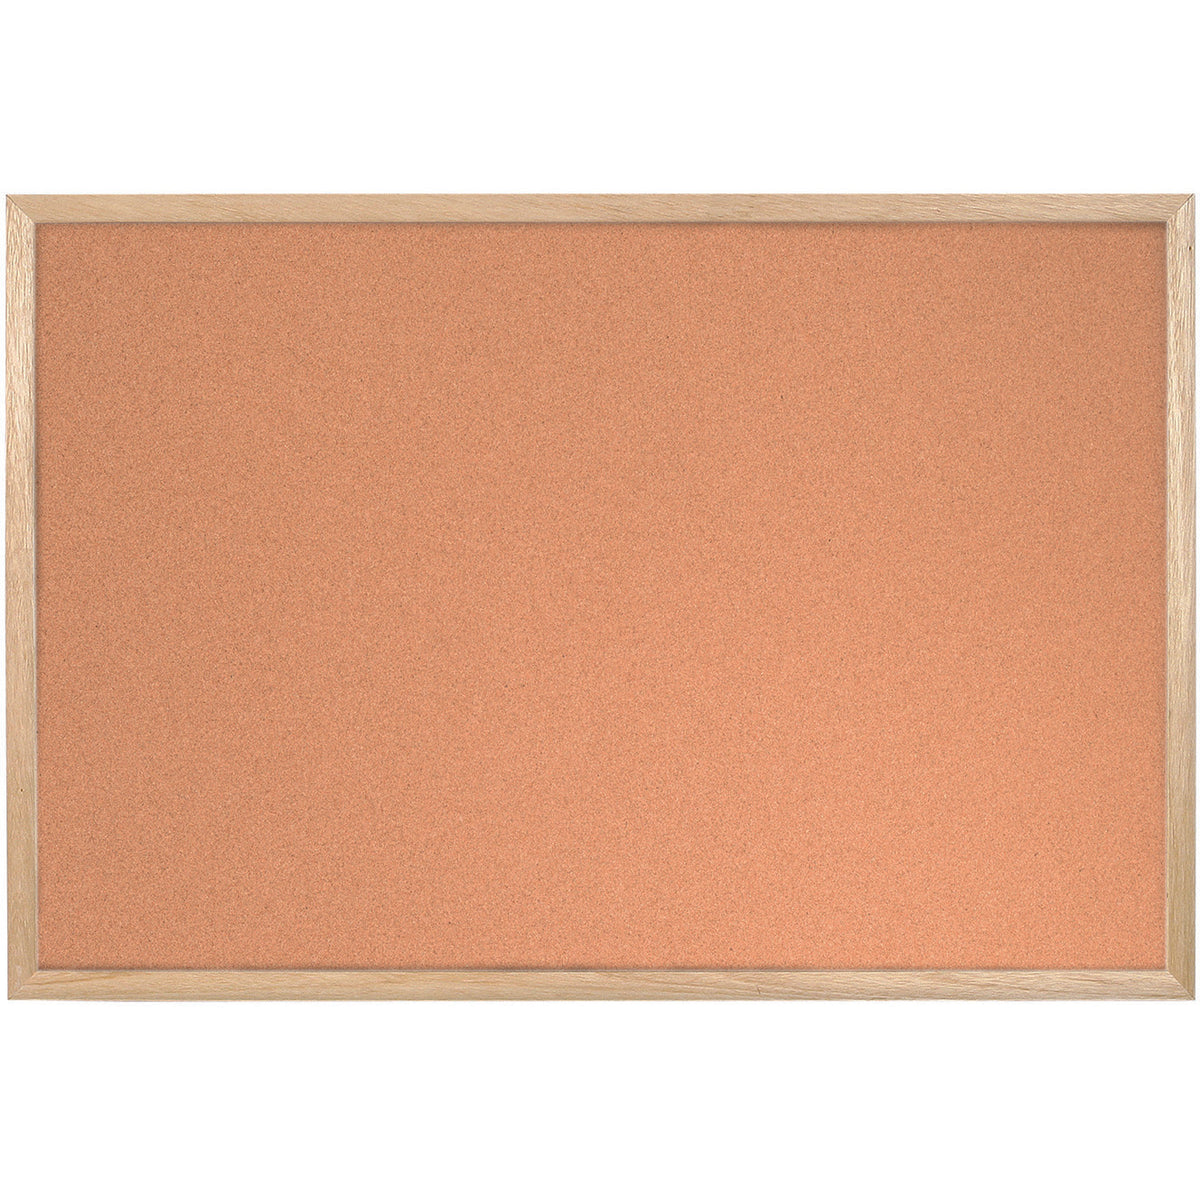 MC180012010 Cork Push Pin Bulletin Board, 12" x 18", Pine Wood Frame, Wall Mount Kit Included by MasterVision